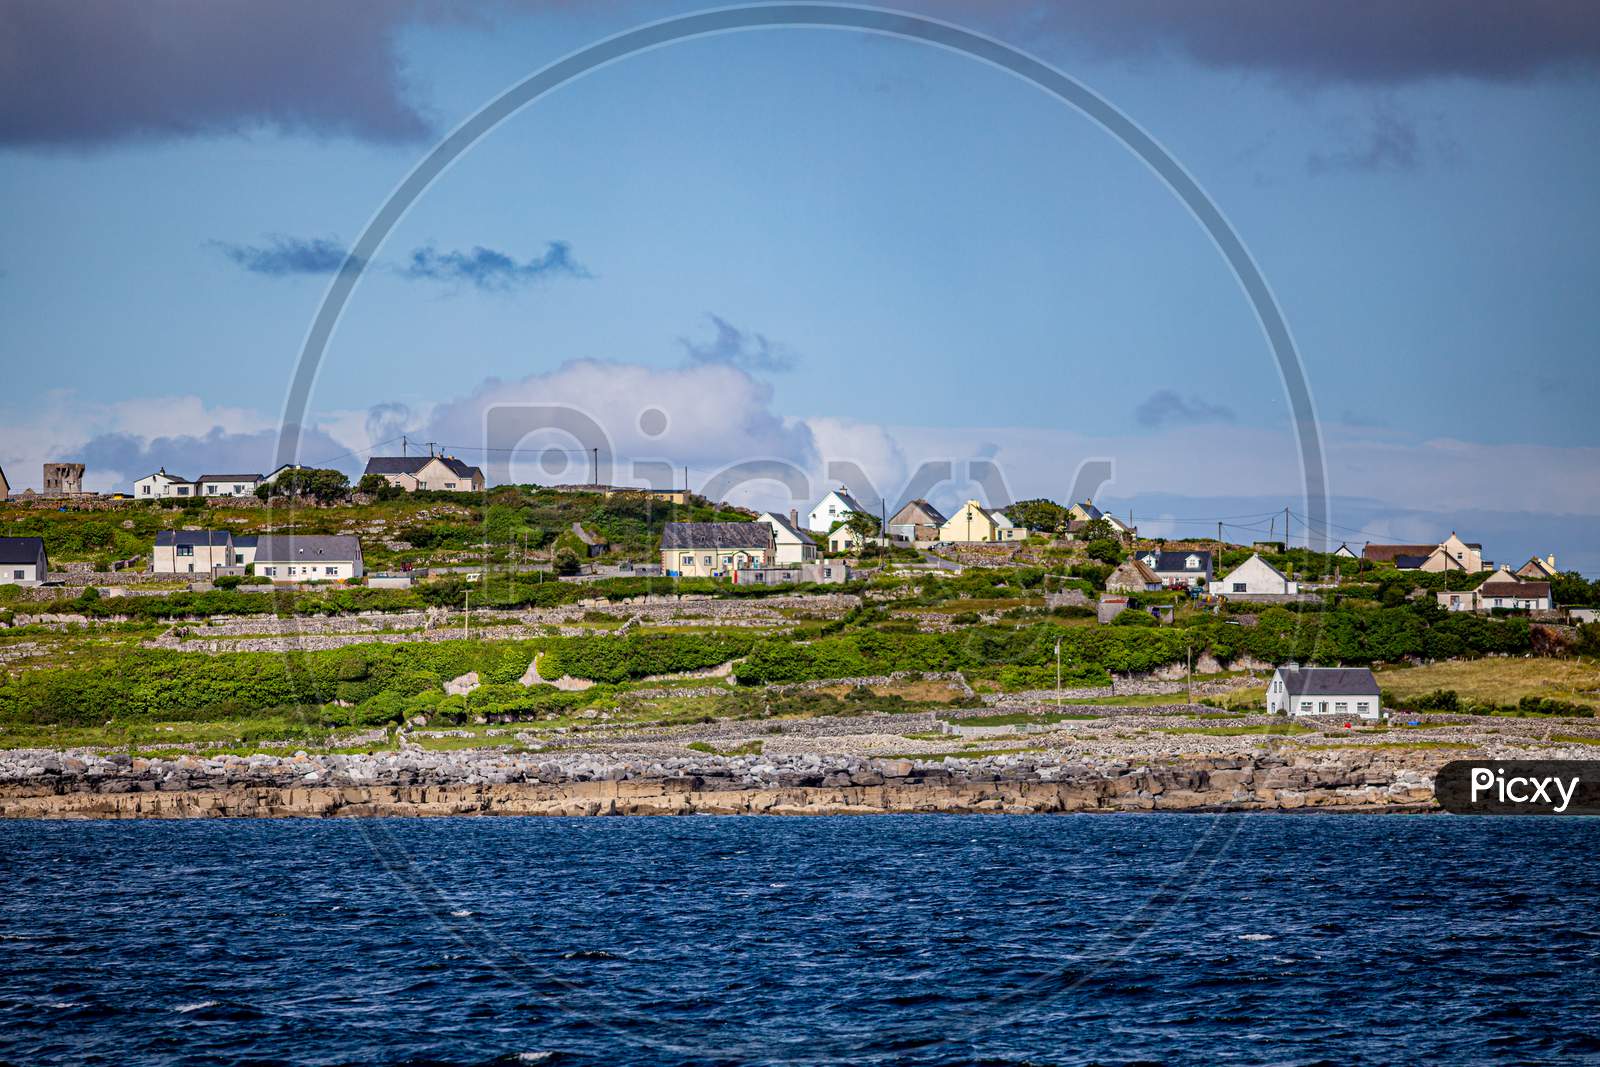 Beautiful View Of The Inis Oirr Island With Its Houses Seen From A Boat On The Calm Blue Waters Of The Atlantic Ocean, Wonderful Sunny Day In The Aran Islands, Ireland